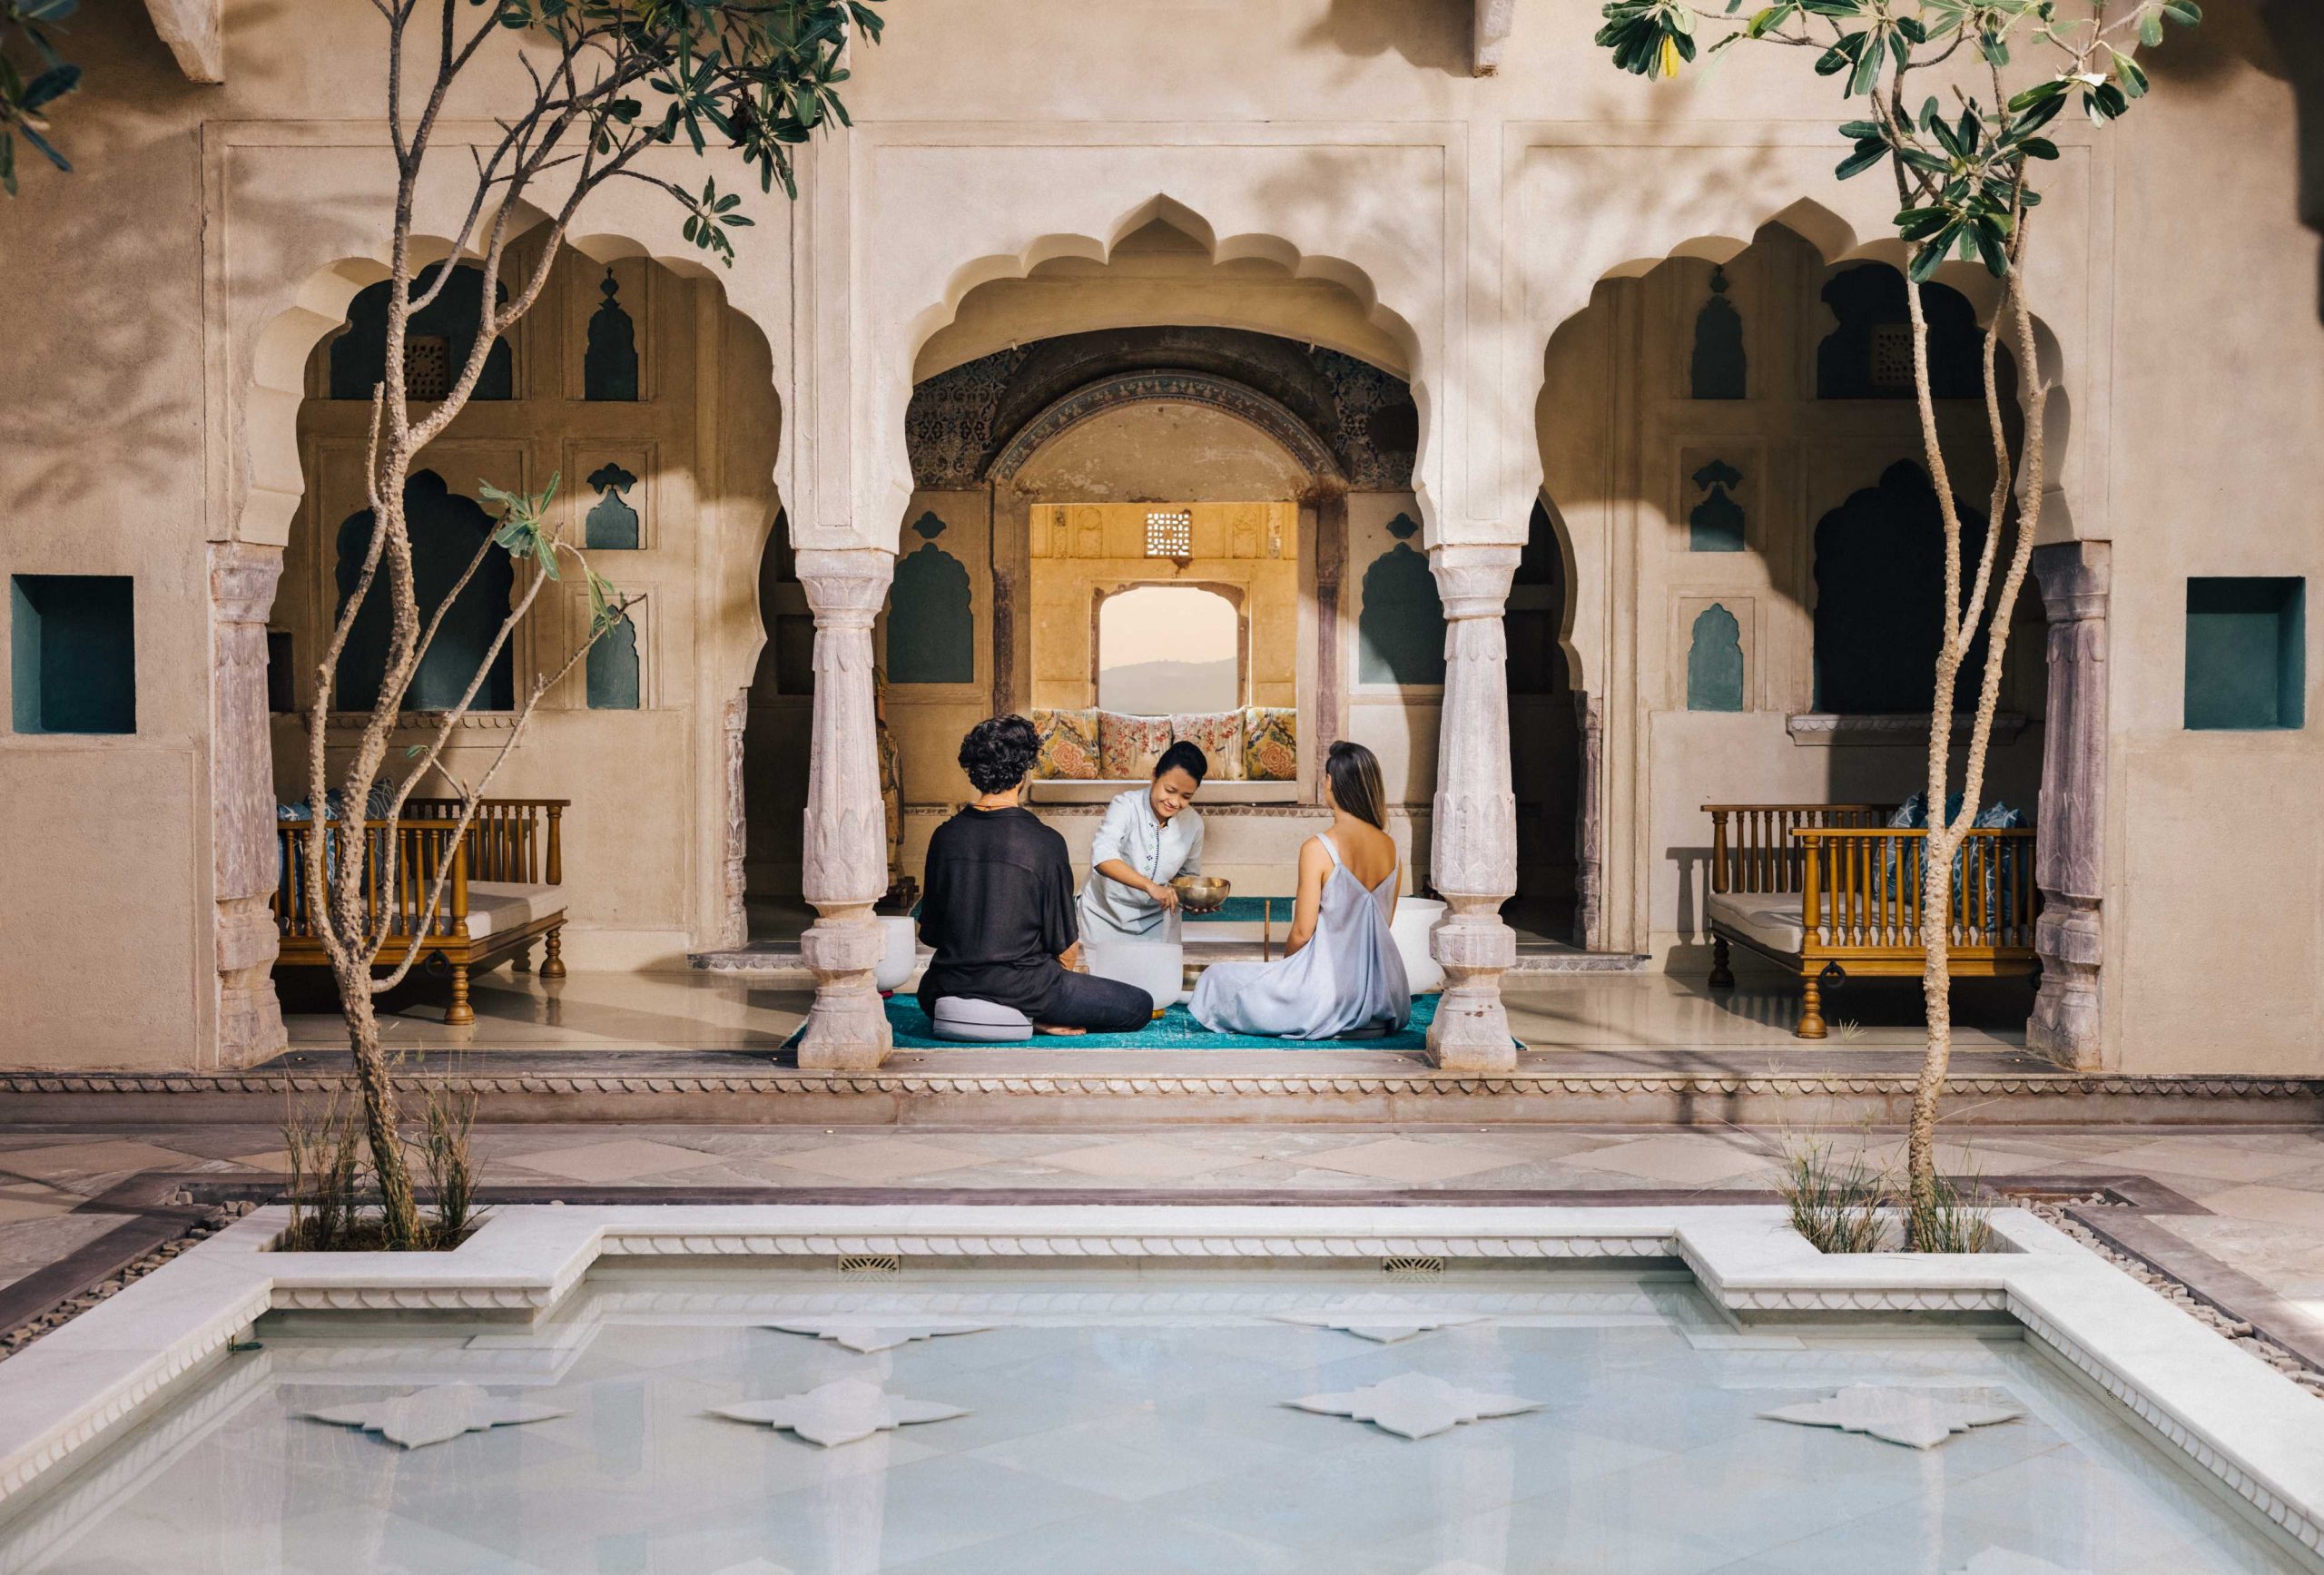 Wellnessly collaborates with Six Senses Fort Barwara for its debut wellness retreat in September